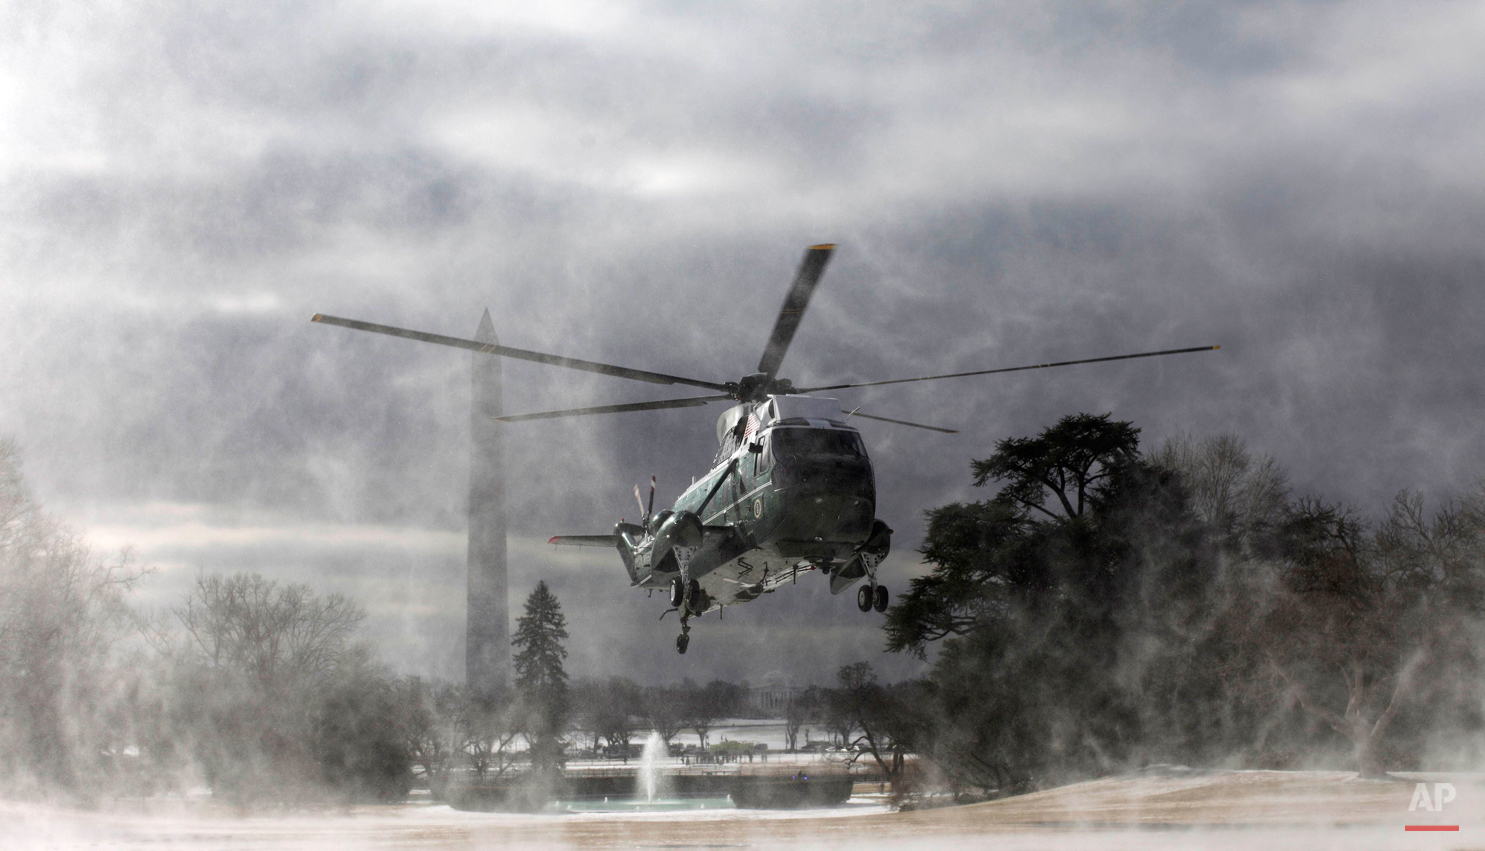  The Marine One helicopter kicks up snow and ice as it lands on the South Lawn of the White House in Washington, Tuesday, Feb. 22, 2011, prior to President Barack Obama's departure to Cleveland, Ohio. (AP Photo/Charles Dharapak) 